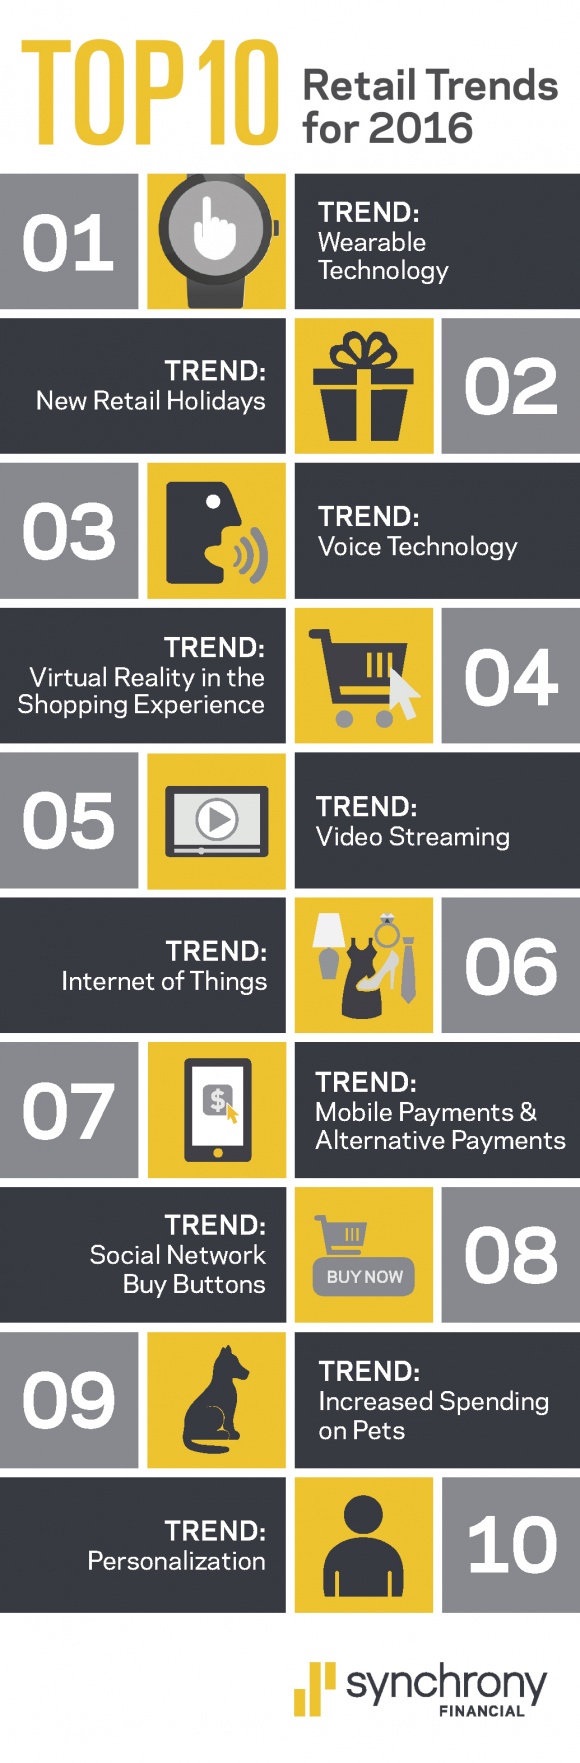 Photo: Technology influences eight of the top 10 retail trends for 2016...